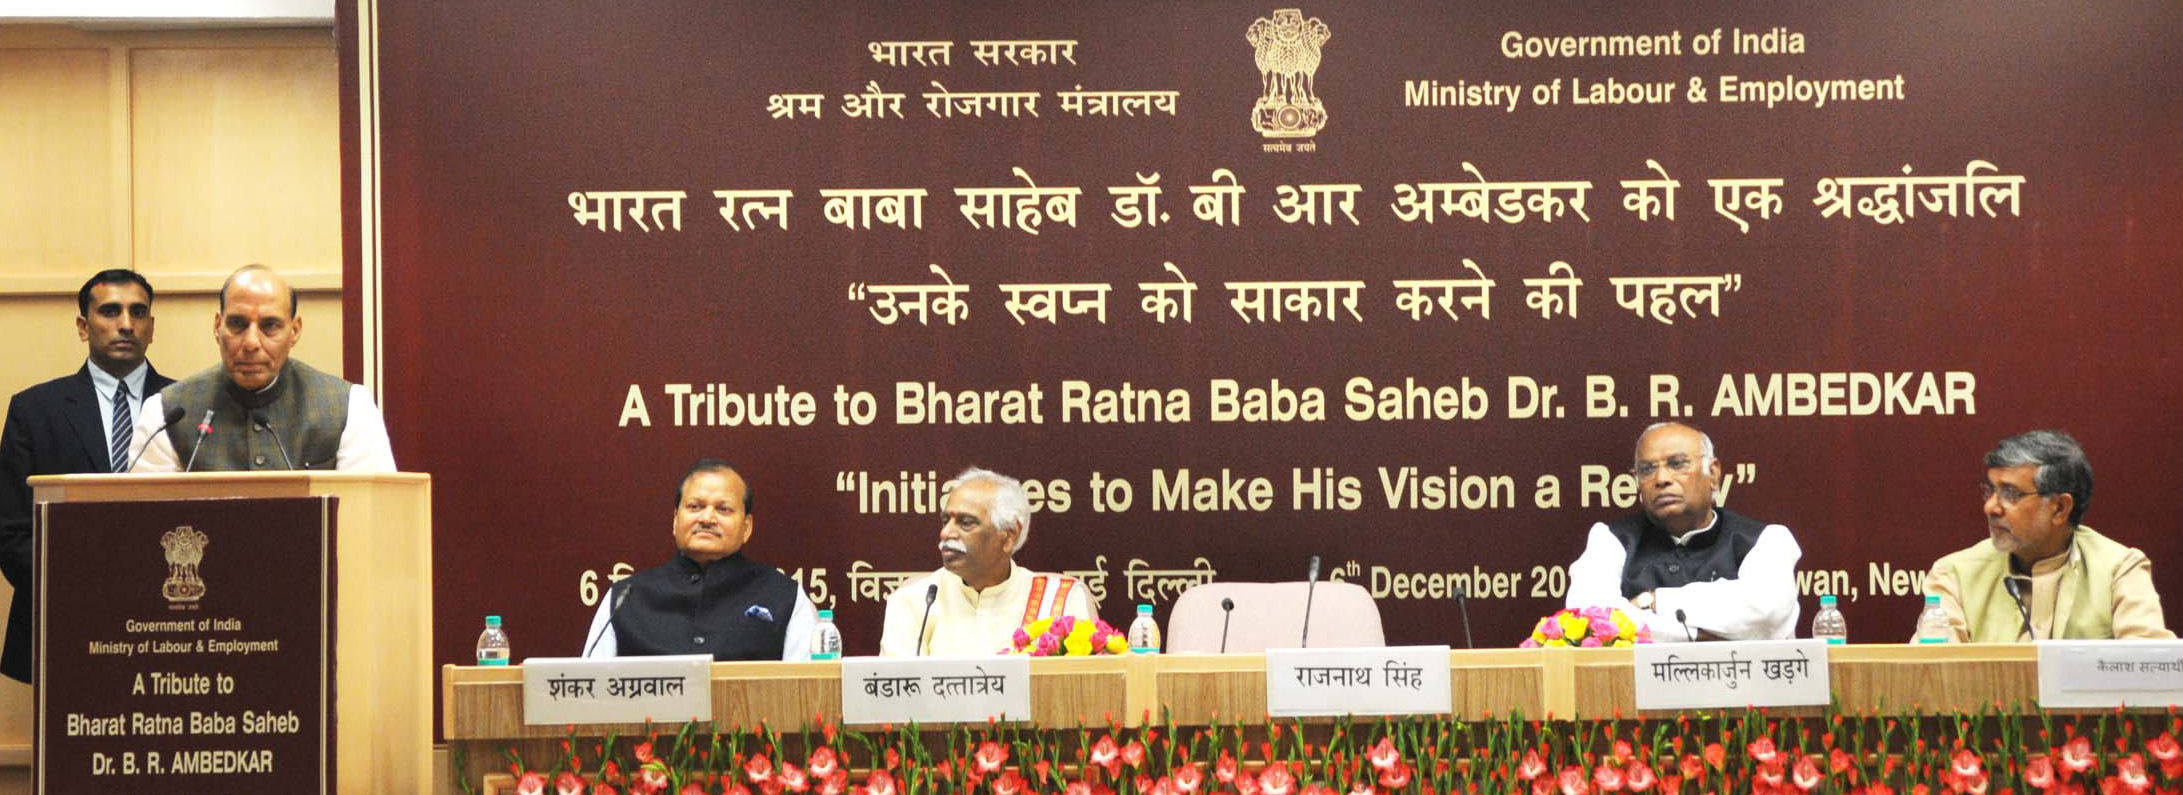 The Union Home Minister, Shri Rajnath Singh addressing after releasing a booklet on Dr. B.R. Ambedkar to commemorate his 125th Birth Anniversary, in New Delhi on December 06, 2015. 	The Minister of State for Labour and Employment (Independent Charge), Shri Bandaru Dattatreya, the Secretary, Ministry of Labour and Employment, Shri Shankar Aggarwal and other dignitaries also seen.